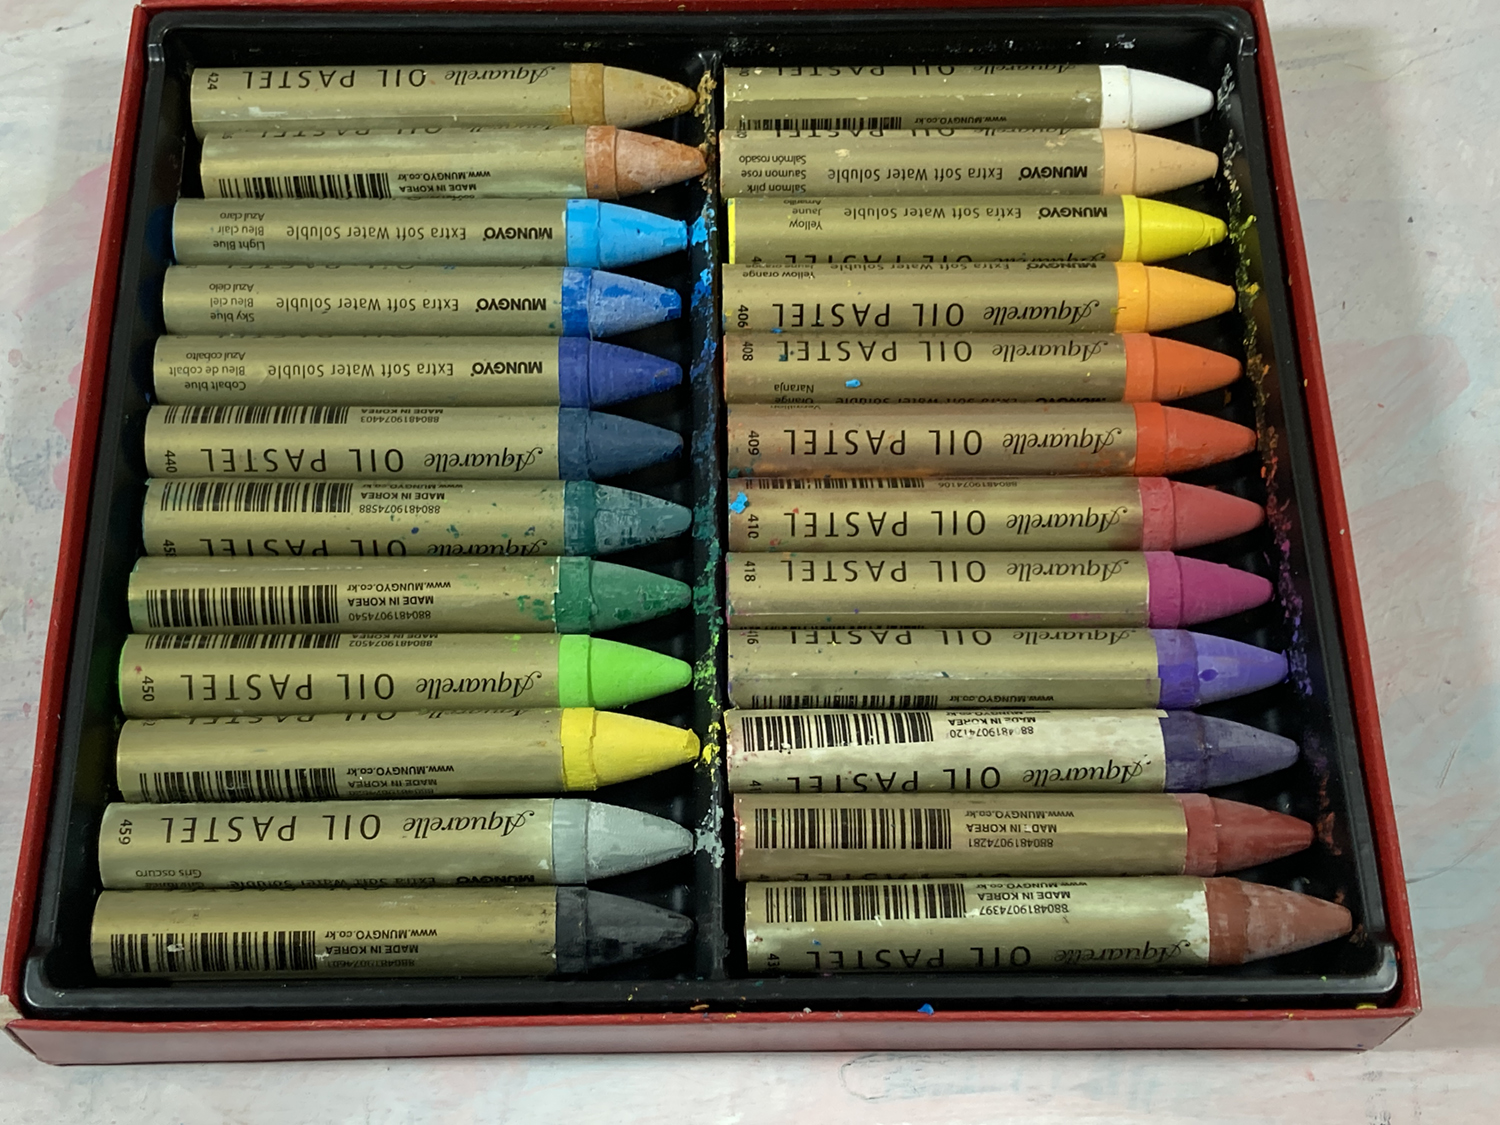 Wax Crayons, Water-soluble Wax Crayons and Oil Pastels